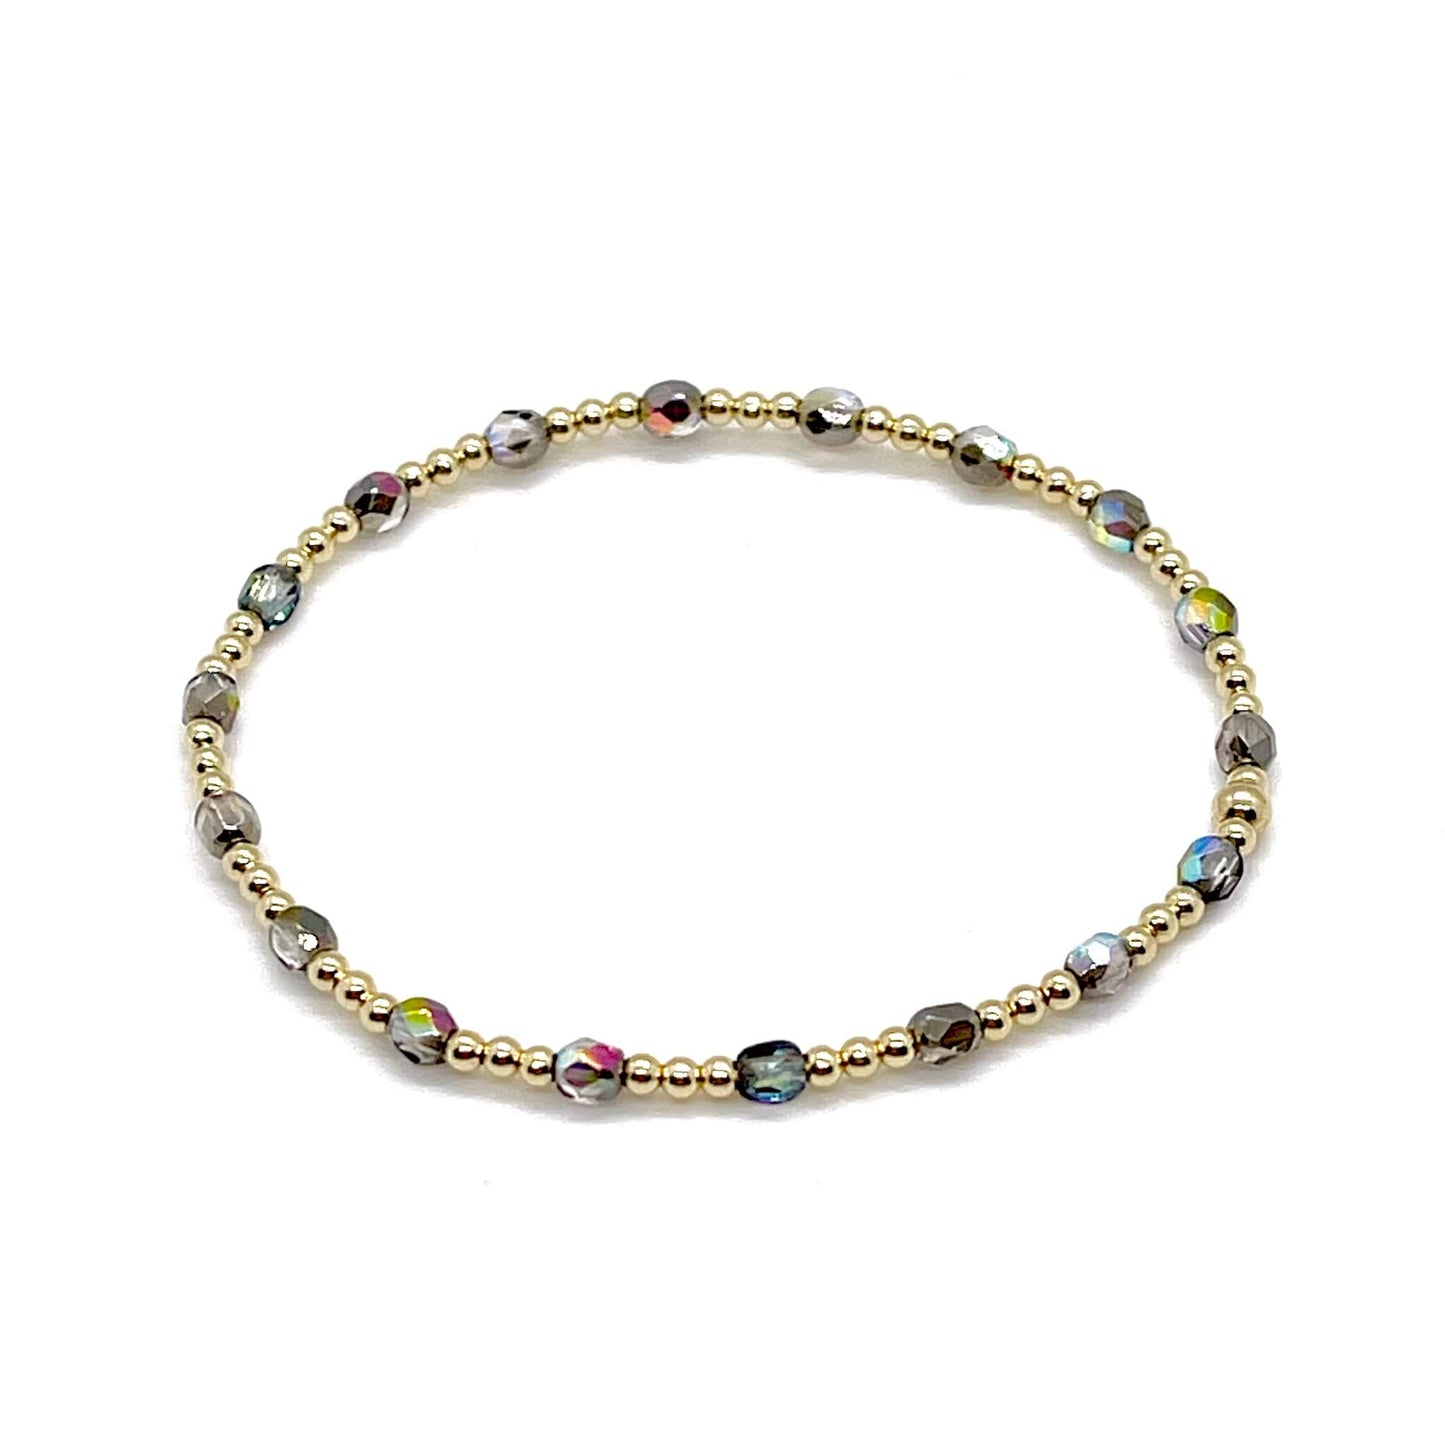 Grey-silver crystal bracelet with dainty 14K gold filled beads on a stretchy cord.